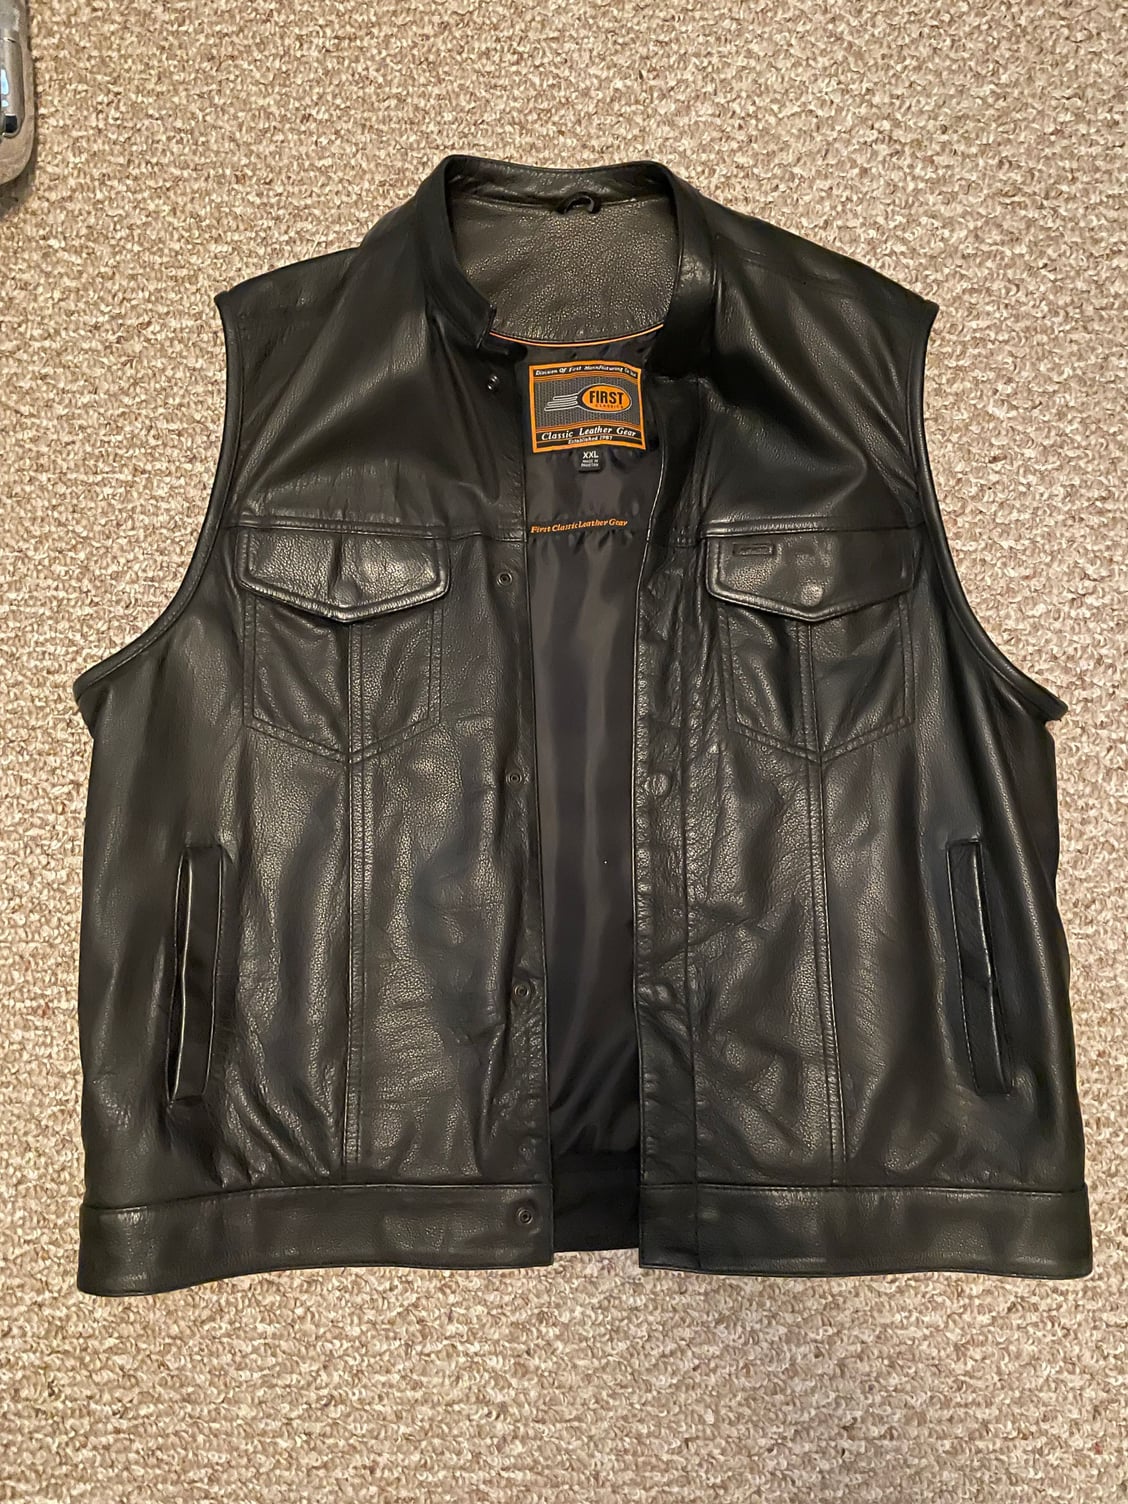 First Gear XXL Leather Riding Vest with Holster Pocket - Harley ...